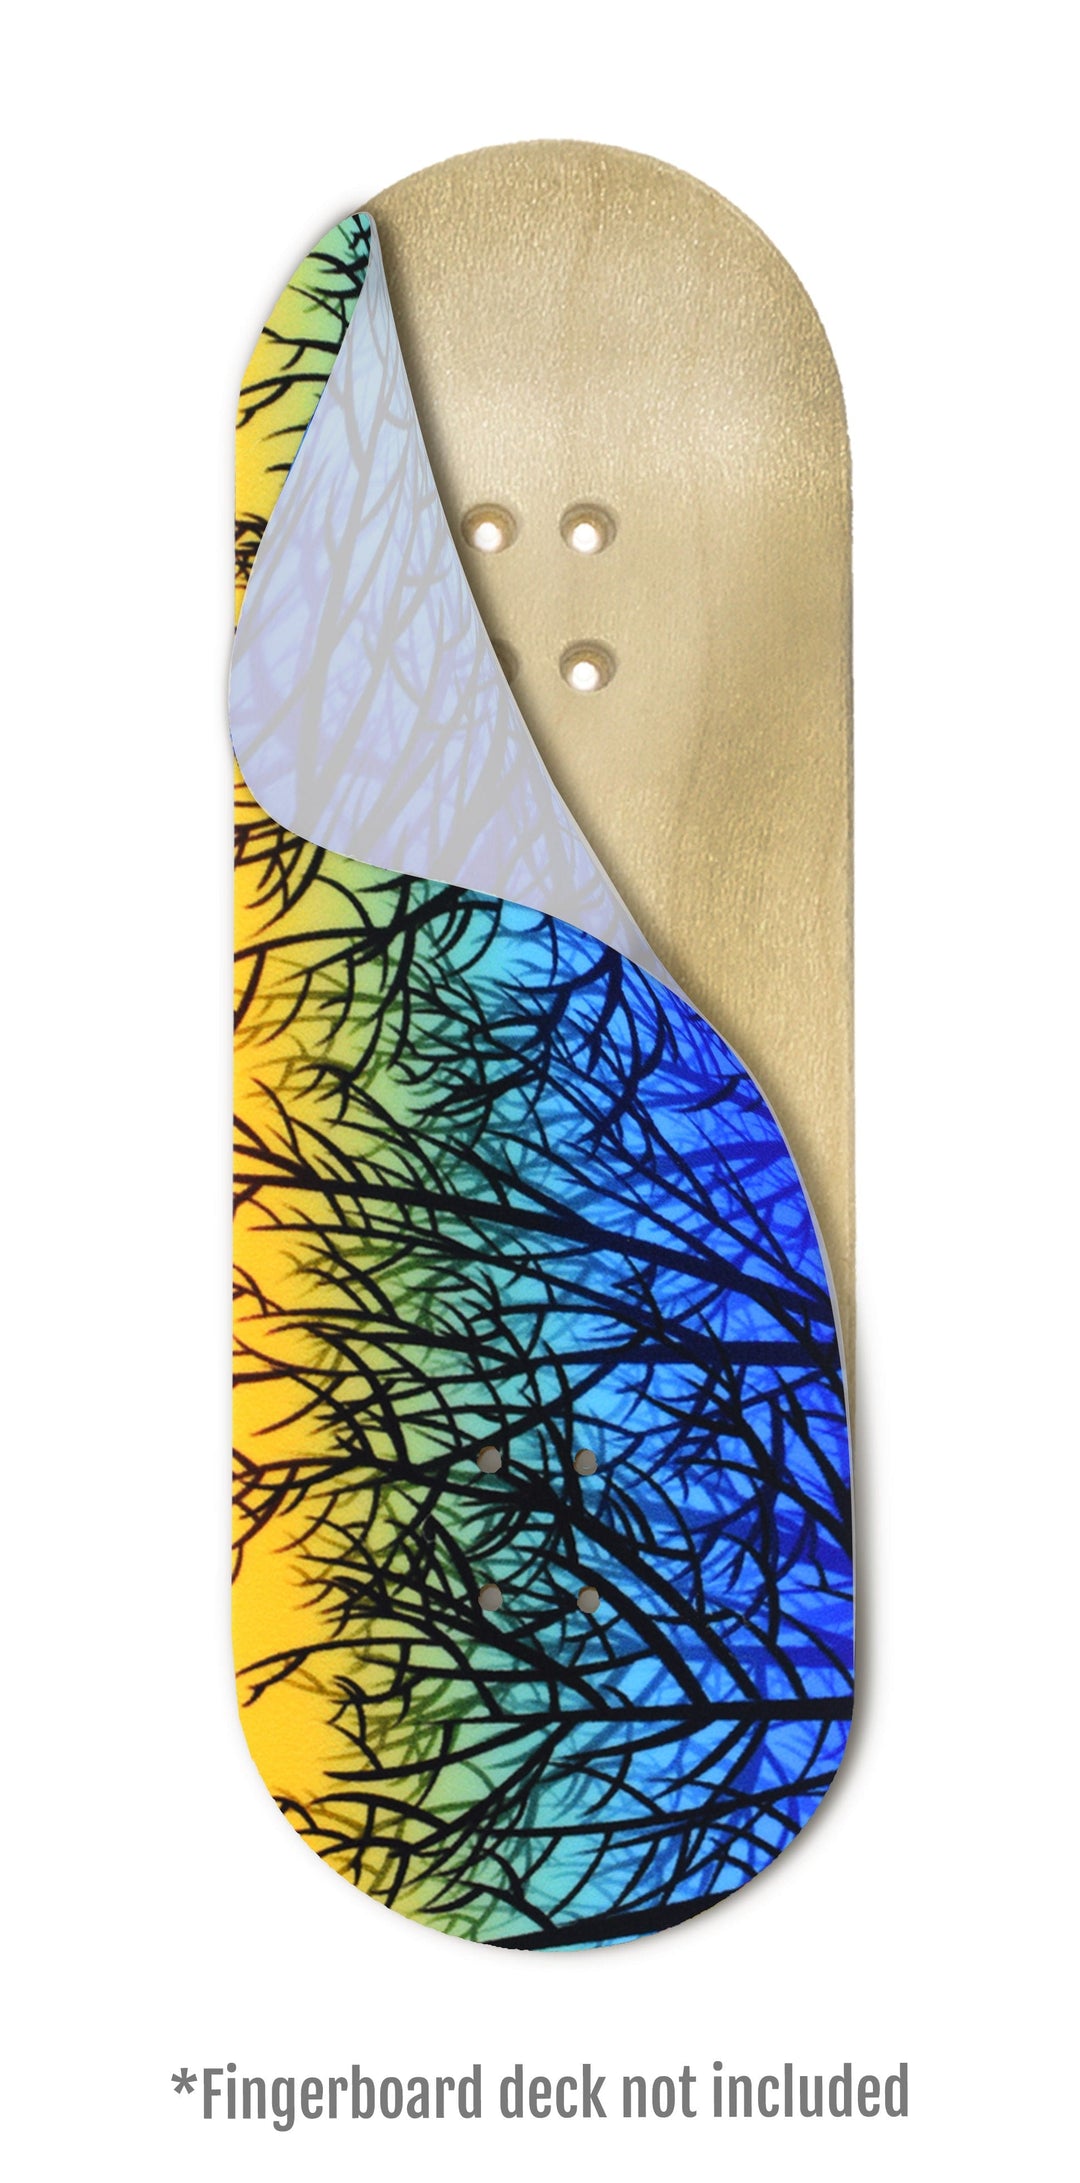 Teak Tuning "Silhouette Trees" Artist Collaboration Deck Graphic Wrap - 35mm x 110mm